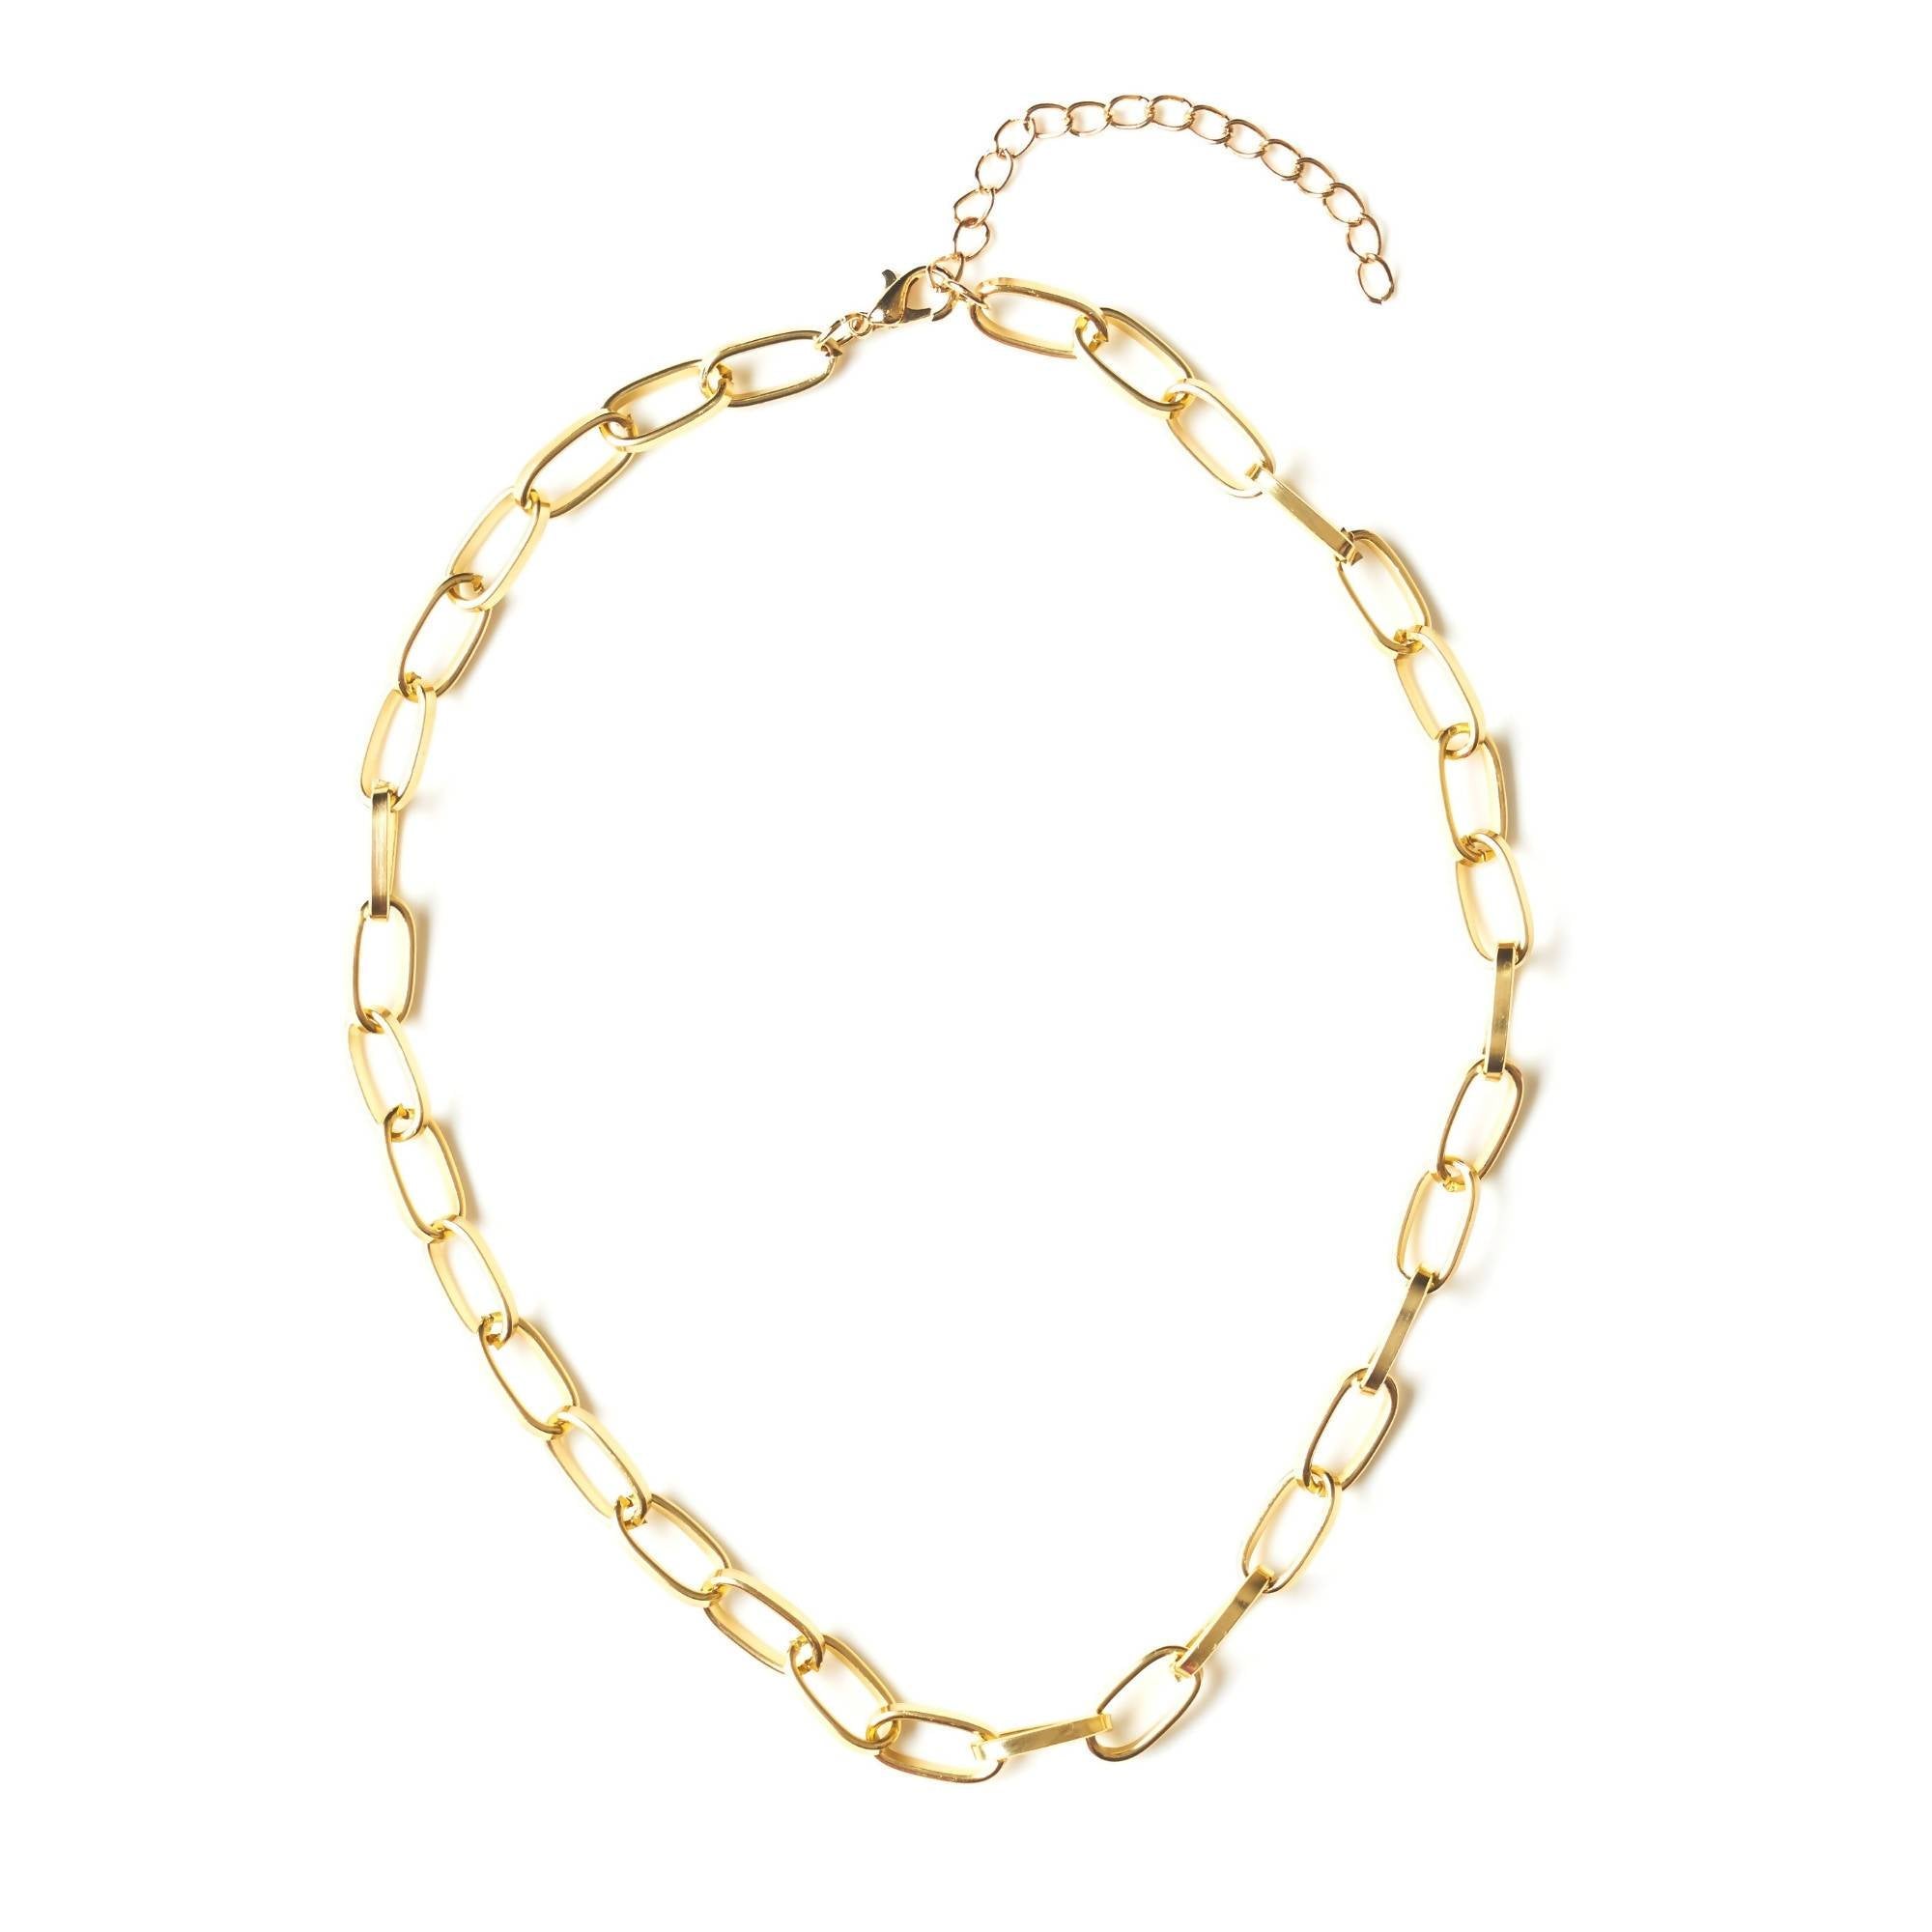 J. By Jee Minimal Oval Chain in Gold Necklace Necklaces J By Jee 